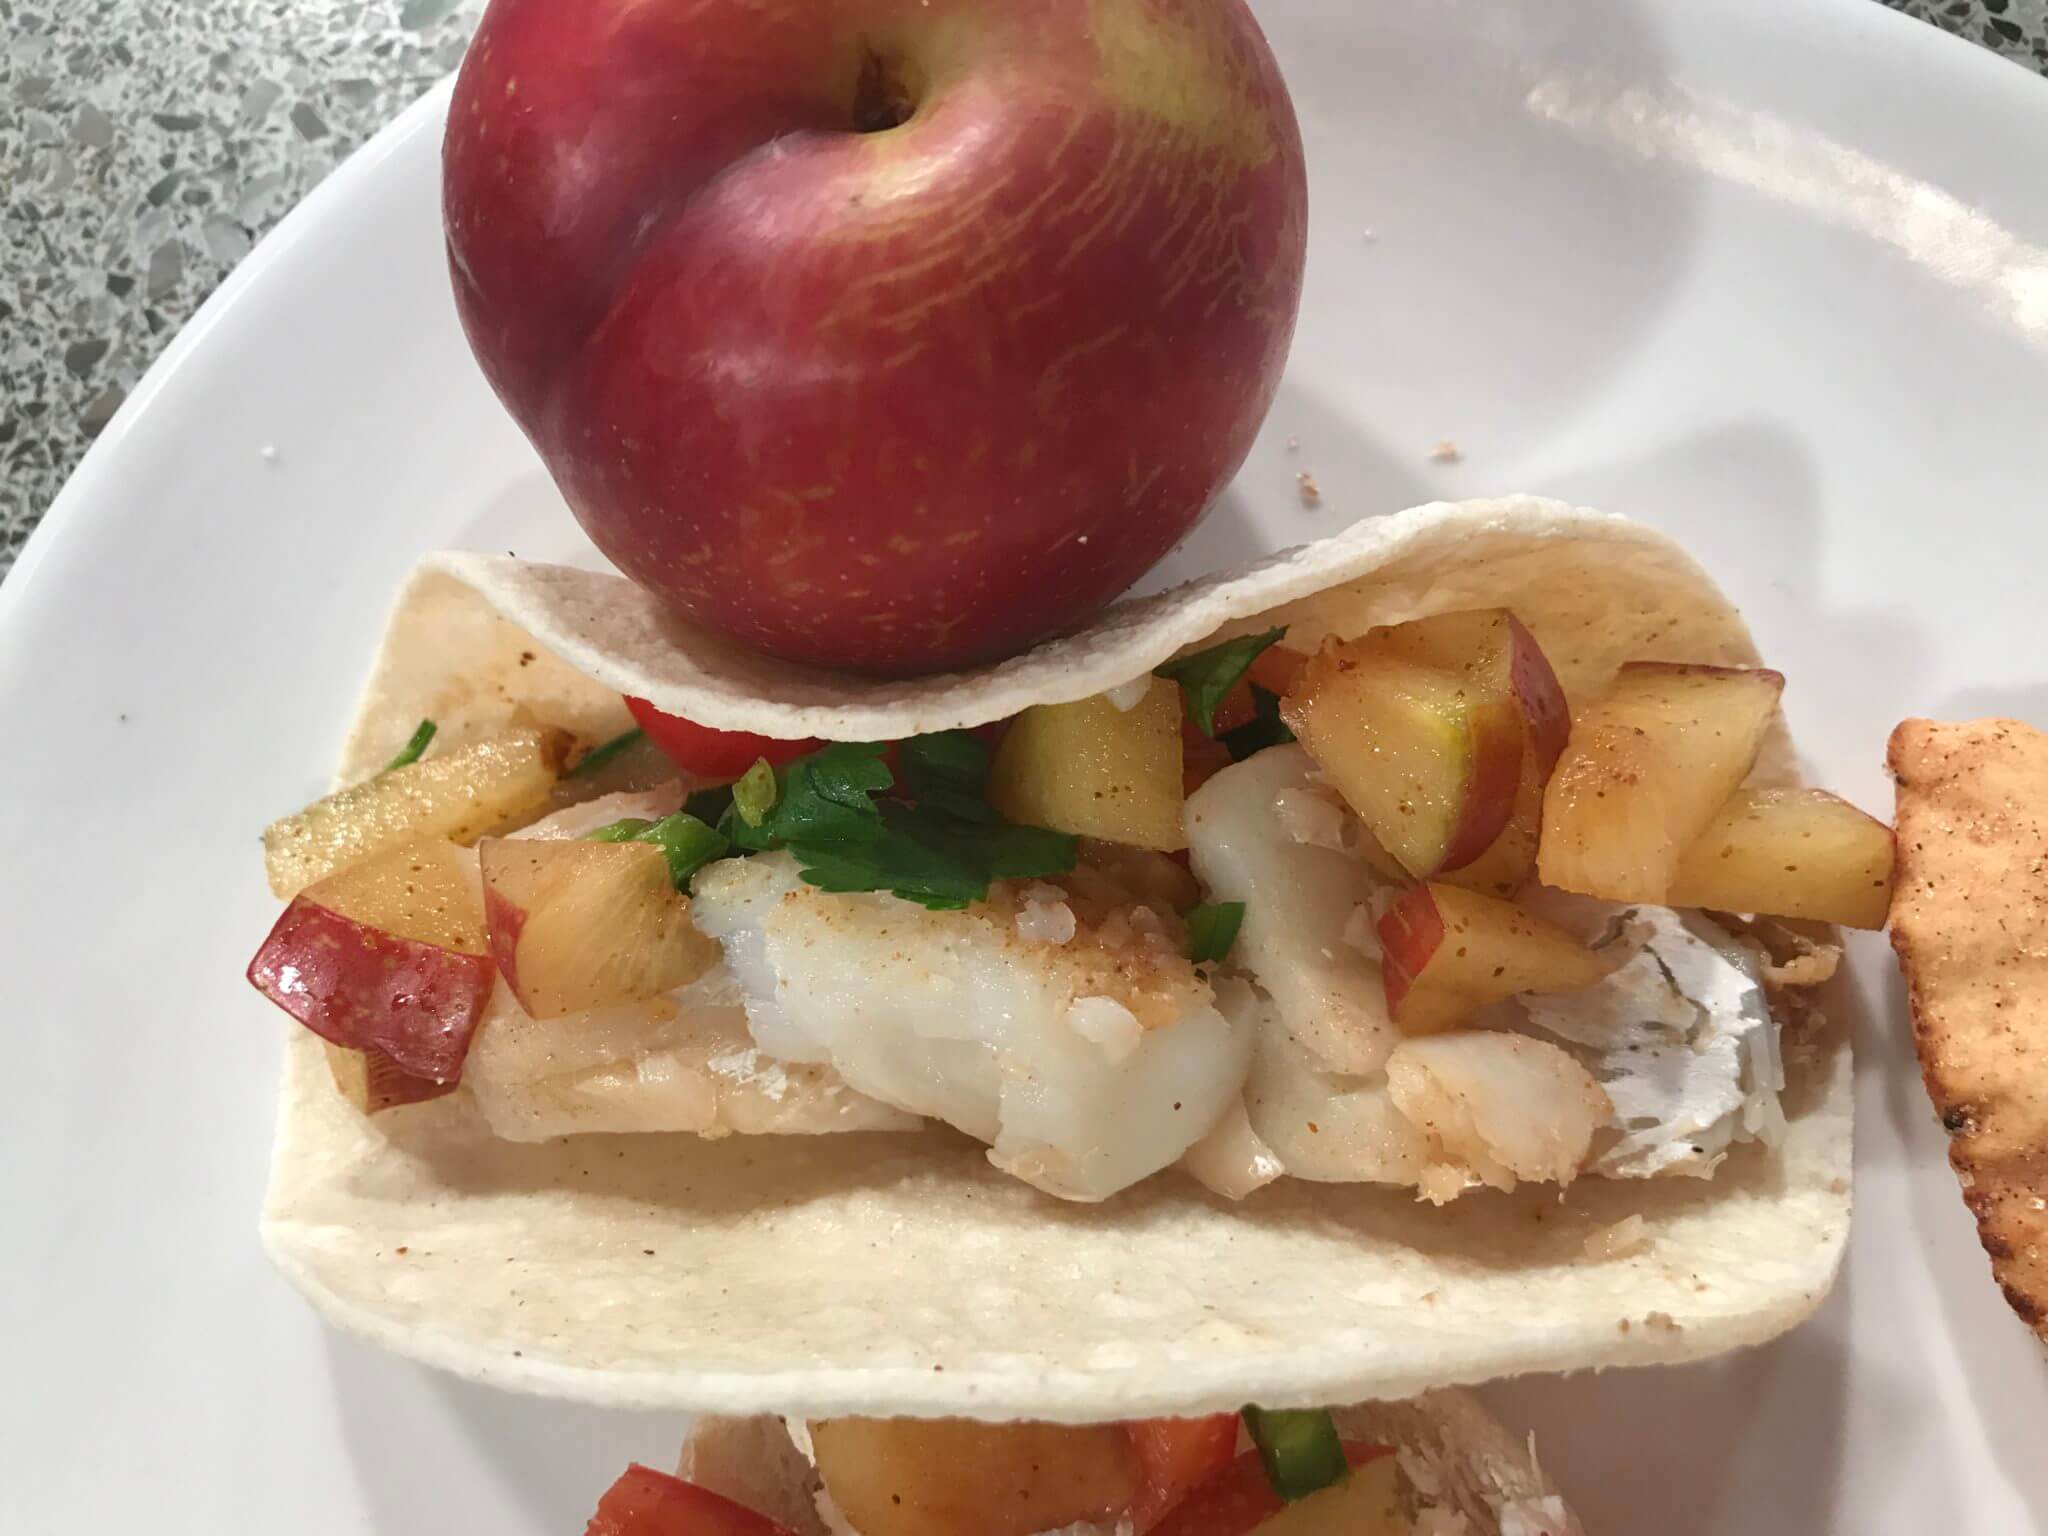 Tailgating and camping recipes: Fish tacos with plum salsa